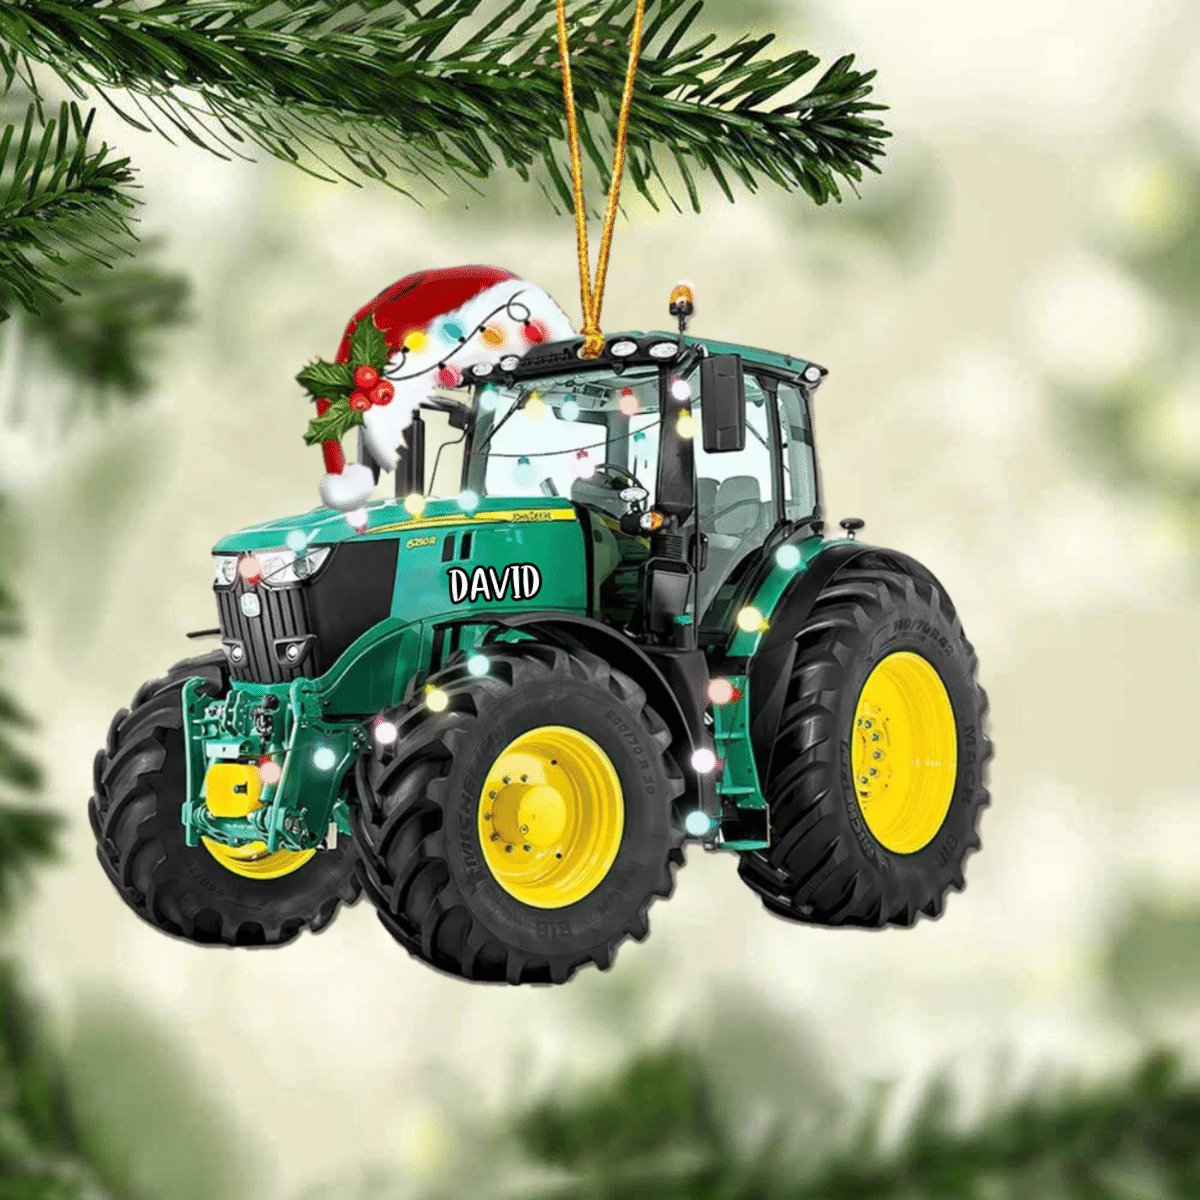 Personalized Tractor Christmas Ornament for Farmer/ Gift for Farmhouse Decor/ Tractor Driver Ornament for Dad